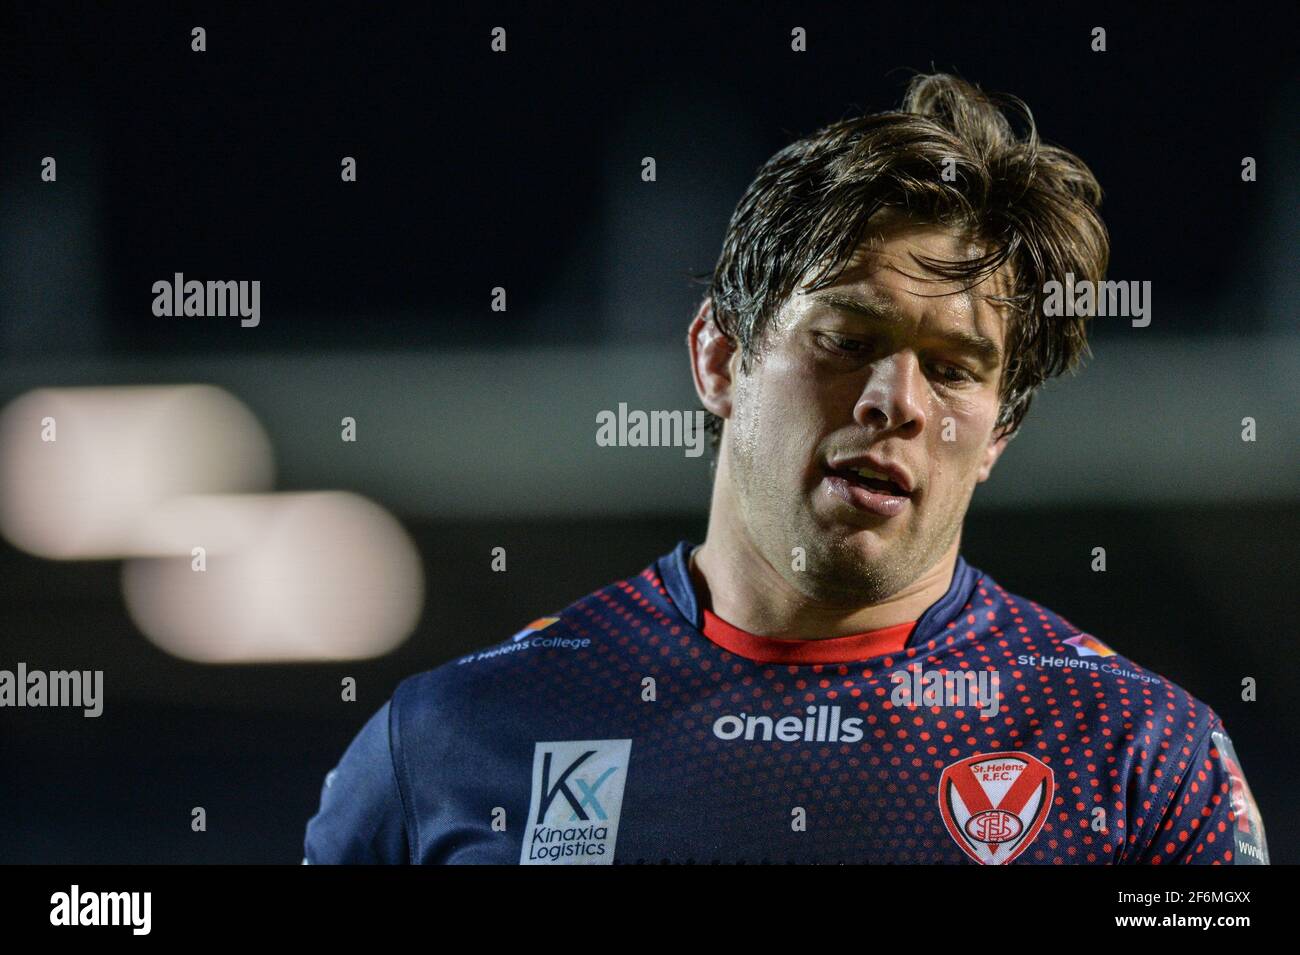 St. Helens, England - 1. April 2021 - Louie McCarthy-Scarsbrook aus St. Helens während der Rugby League Betfred Super League Runde 2 Hull Kingston Rovers vs St. Helens im Totally Wicked Stadium, St. Helens, Großbritannien Dean Williams/Alamy Live News Stockfoto